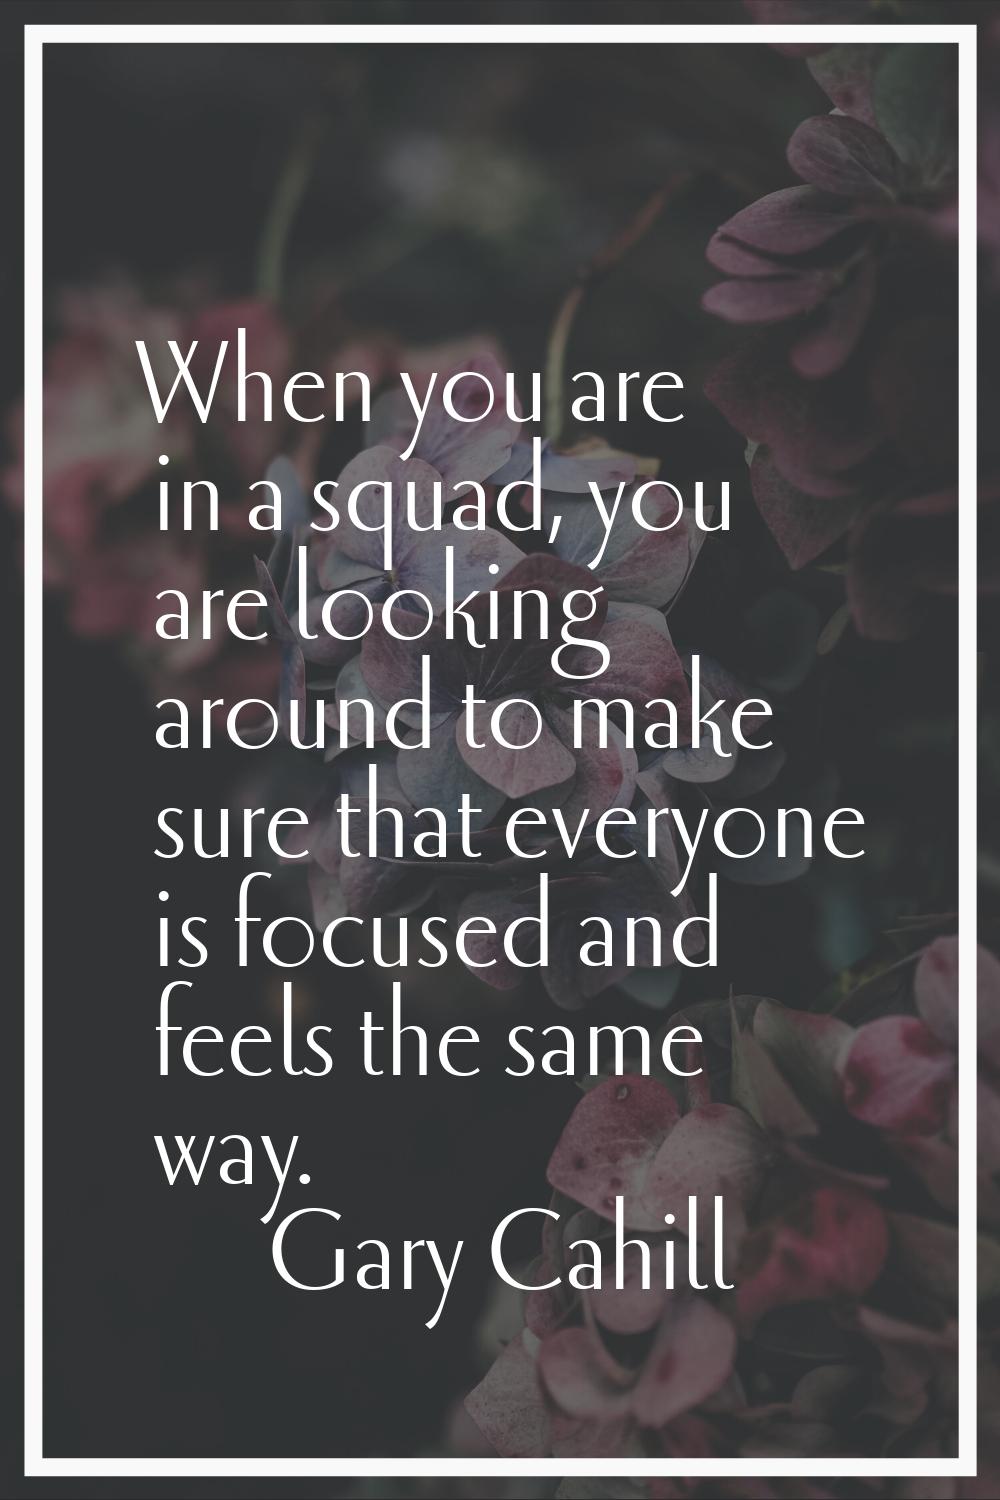 When you are in a squad, you are looking around to make sure that everyone is focused and feels the